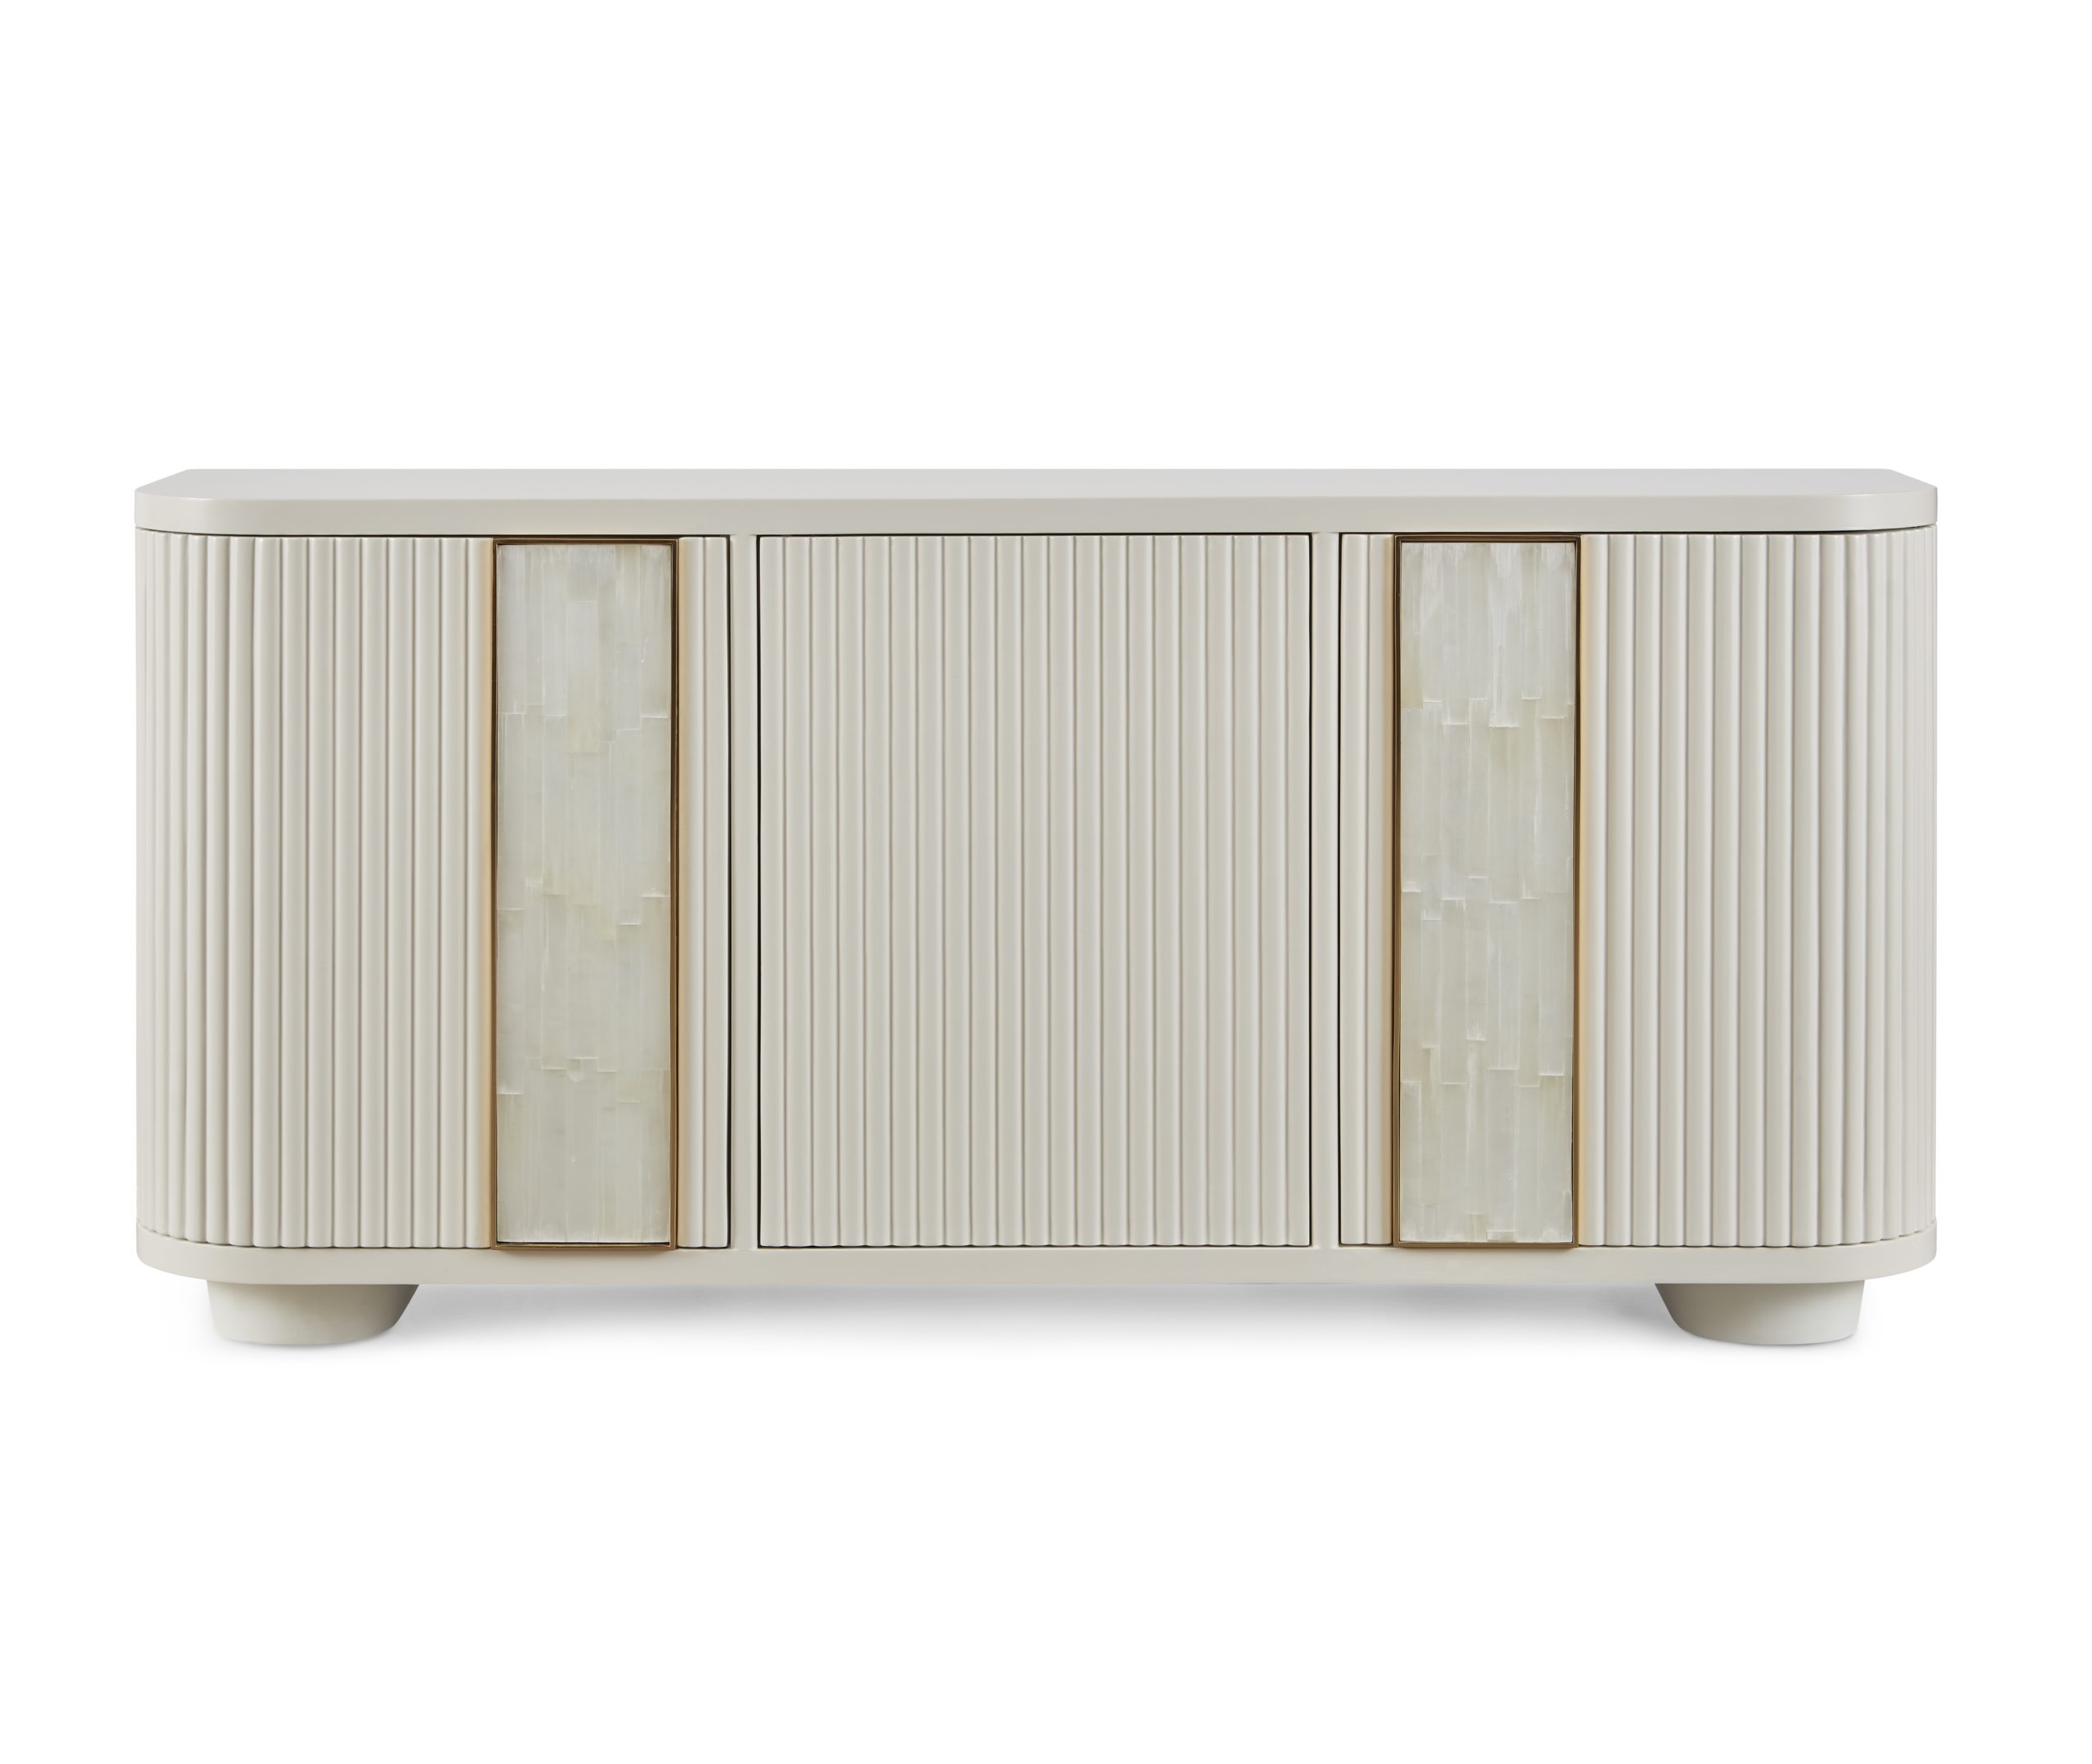 Baker_products_WNWN_harmony_credenza_BAA3275_FRONT-scaled-1